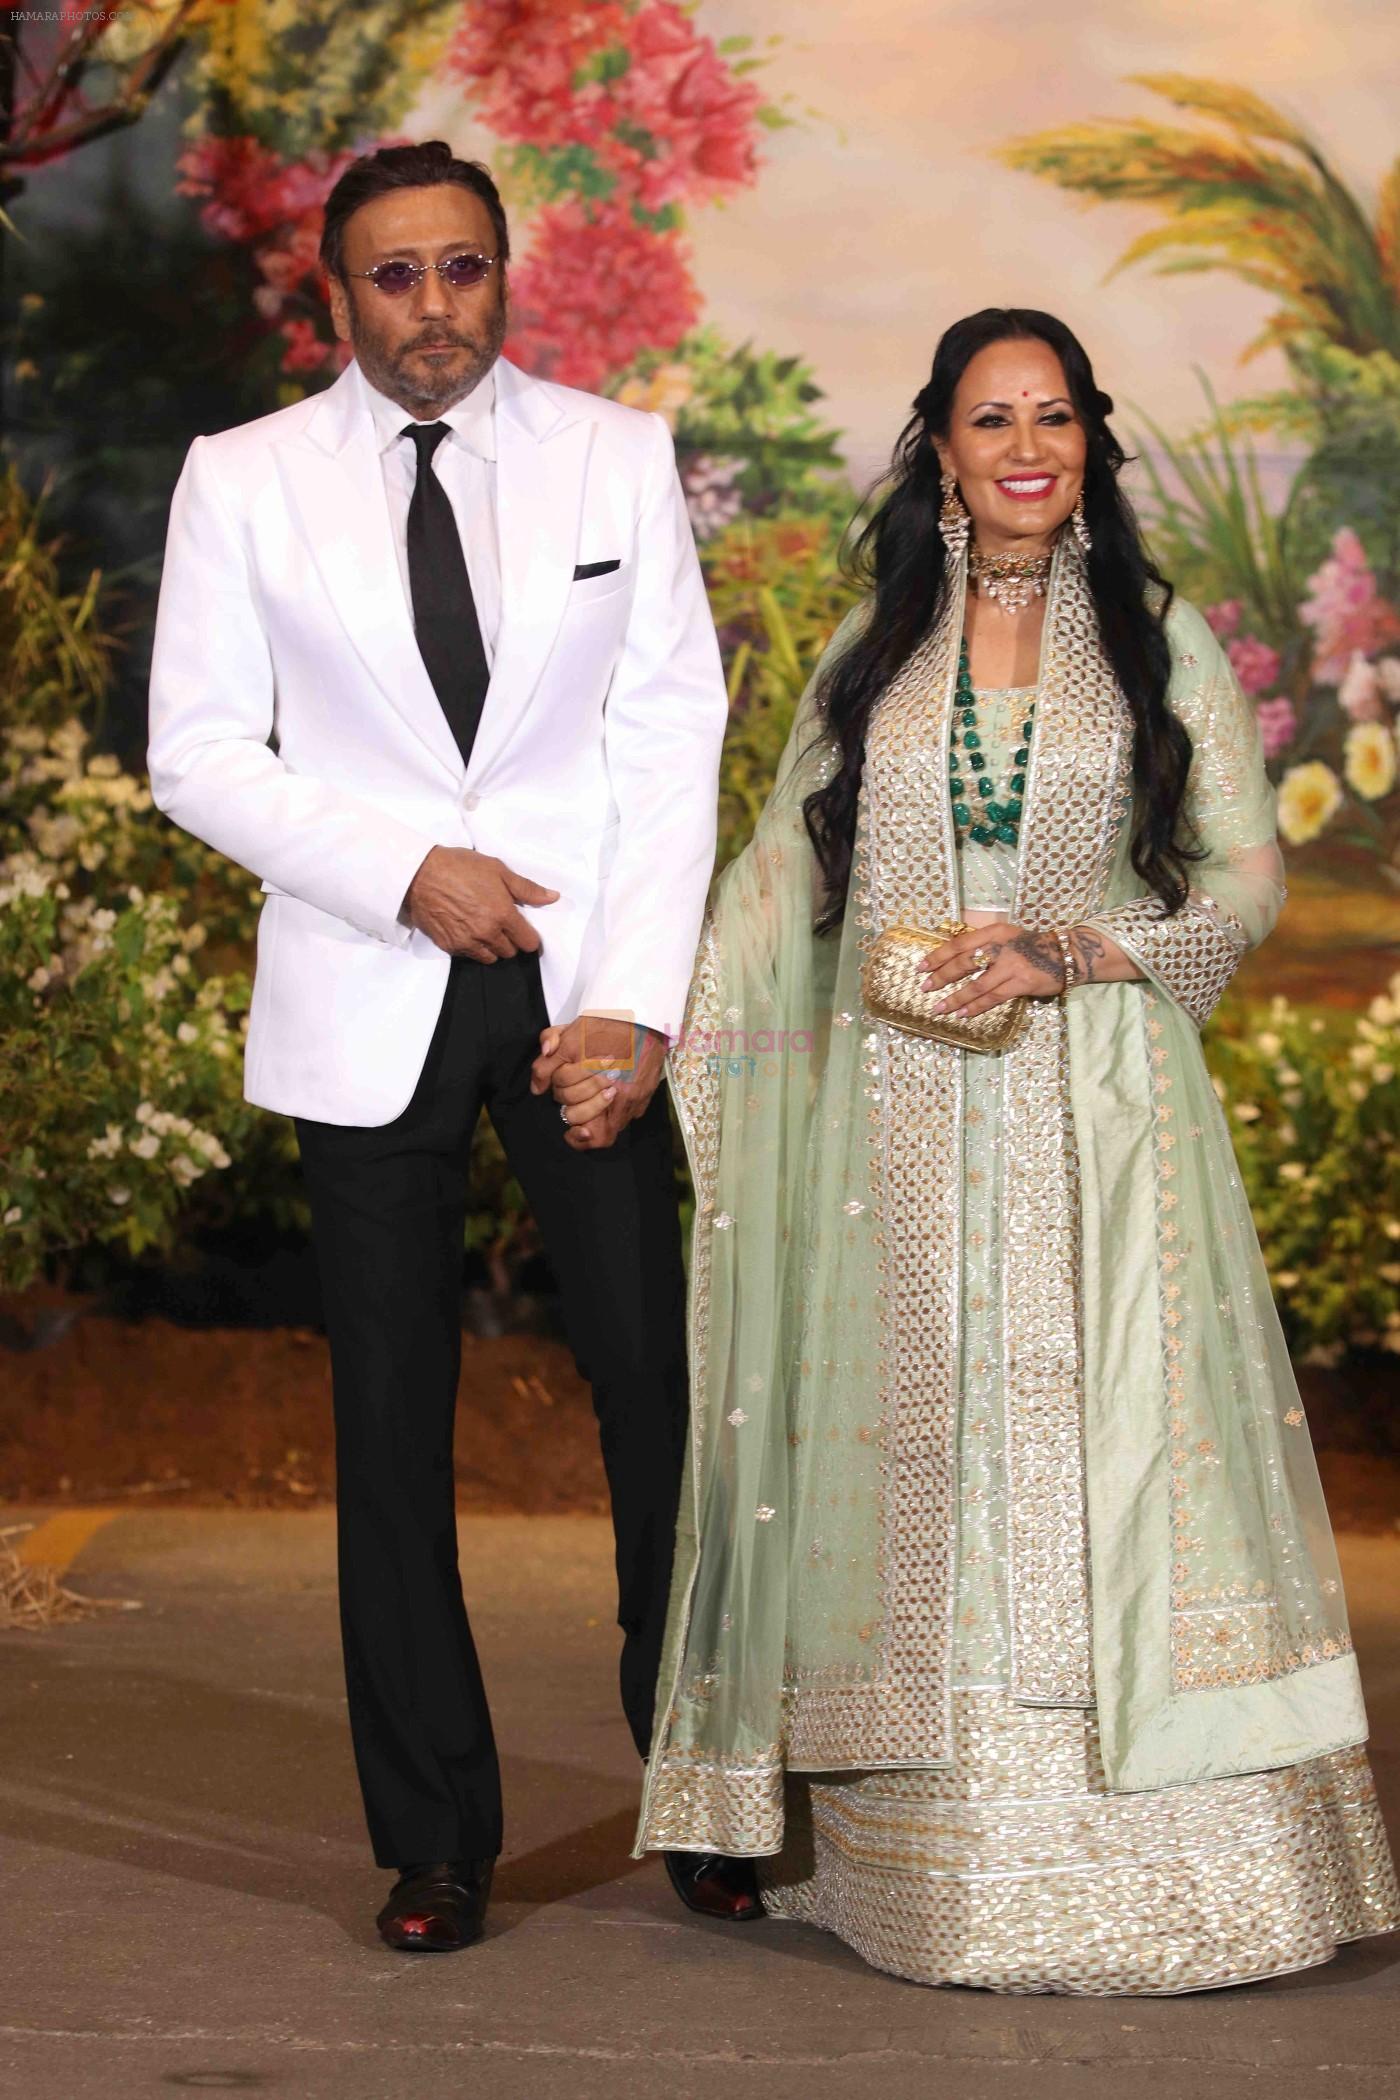 hpse fullsize 3410673302 Jackie Shroff Ayesha Shroff at Sonam Kapoor and Anand Ahuja s Wedding Reception on 8th May 2018 110 5af423a13e0a2 Actor Jackie Shroff, who once spent childhood in a chawl, lives a very luxurious lifestyle today, know his net worth